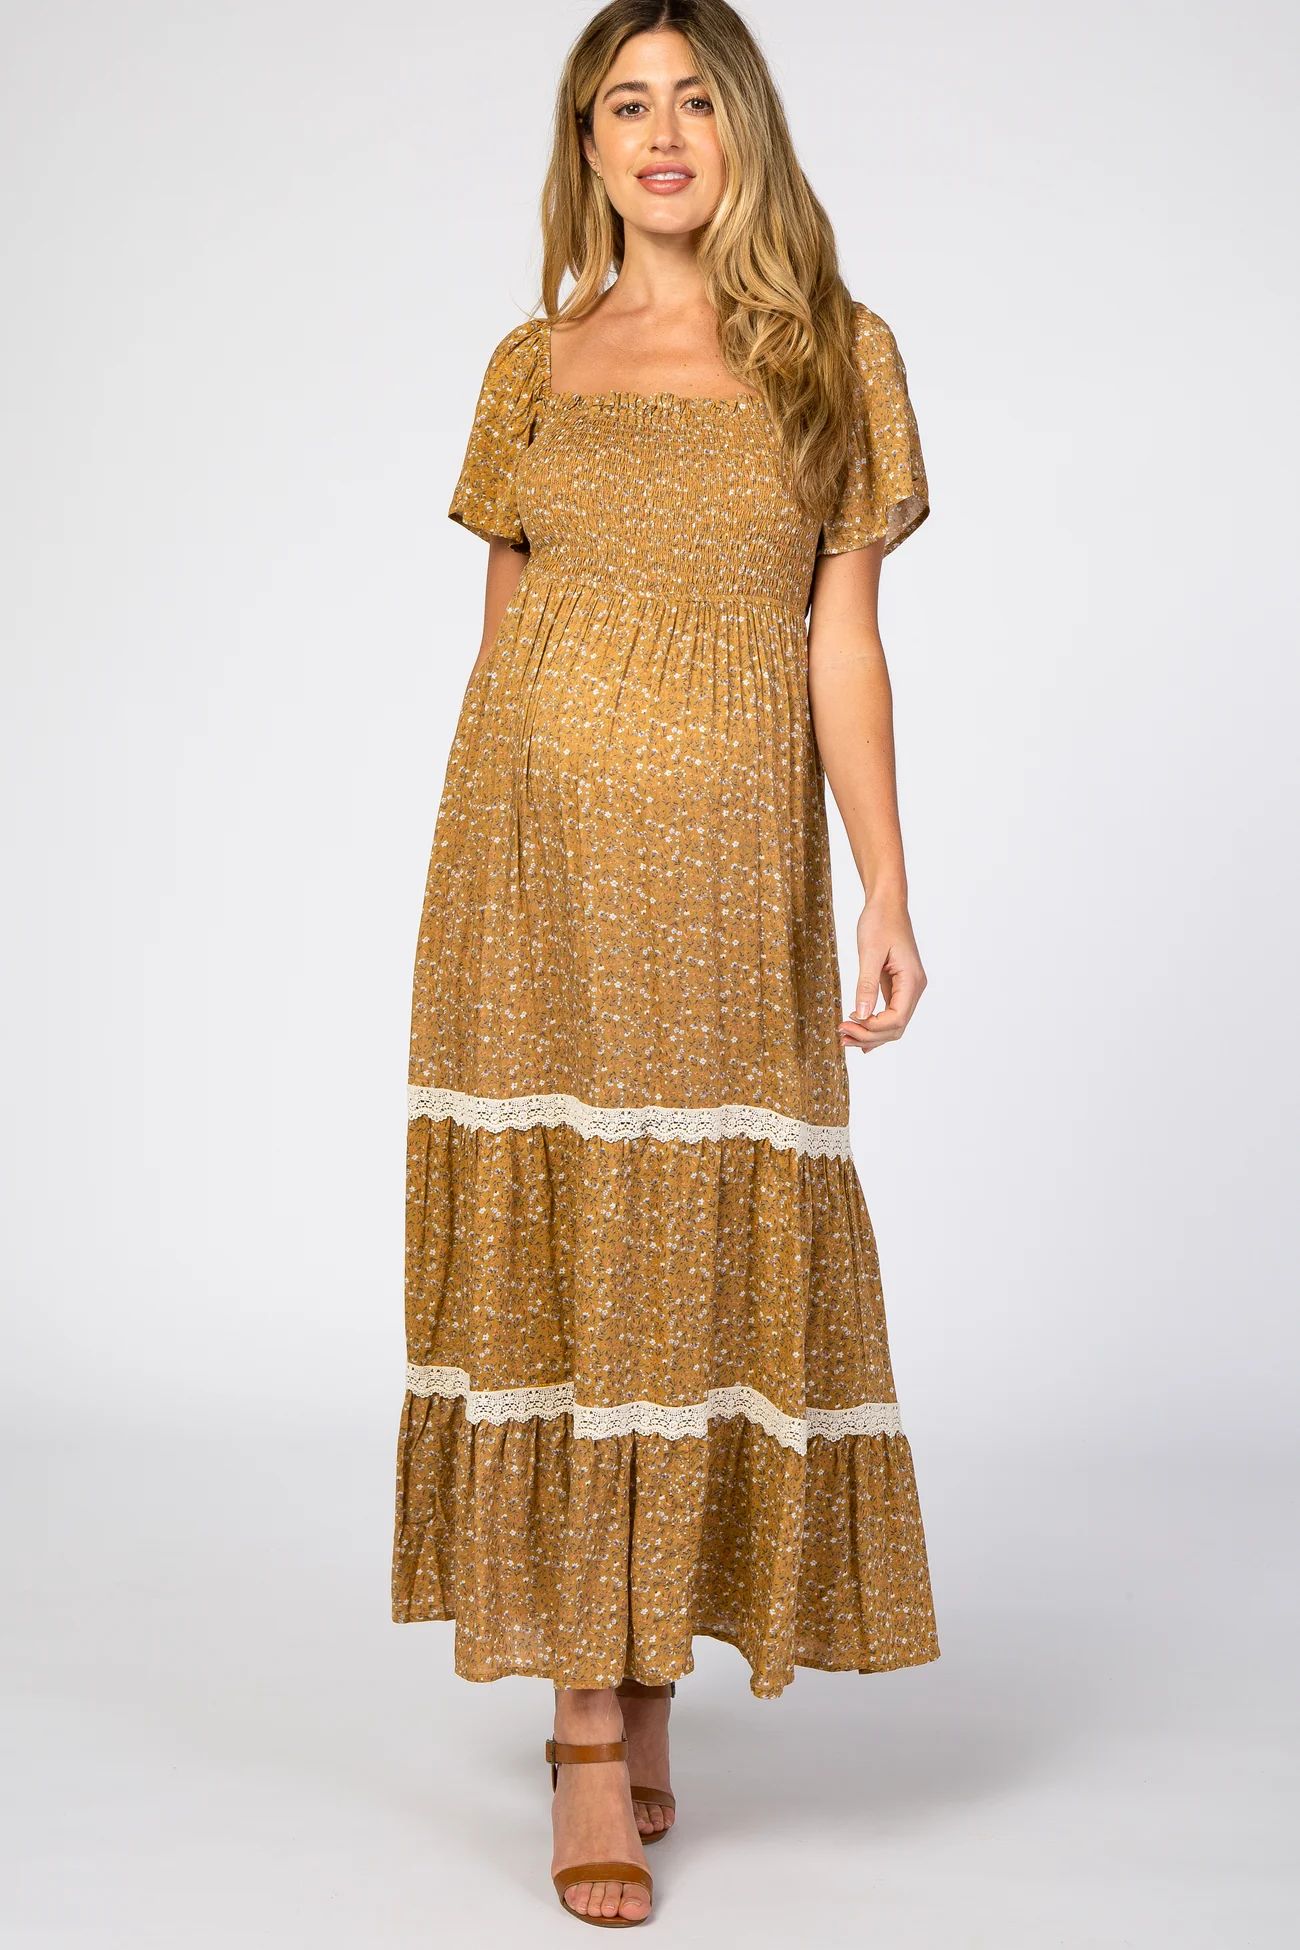 Ivory Floral Square Neck Smocked Front Lace Trim Maternity Maxi Dress | PinkBlush Maternity